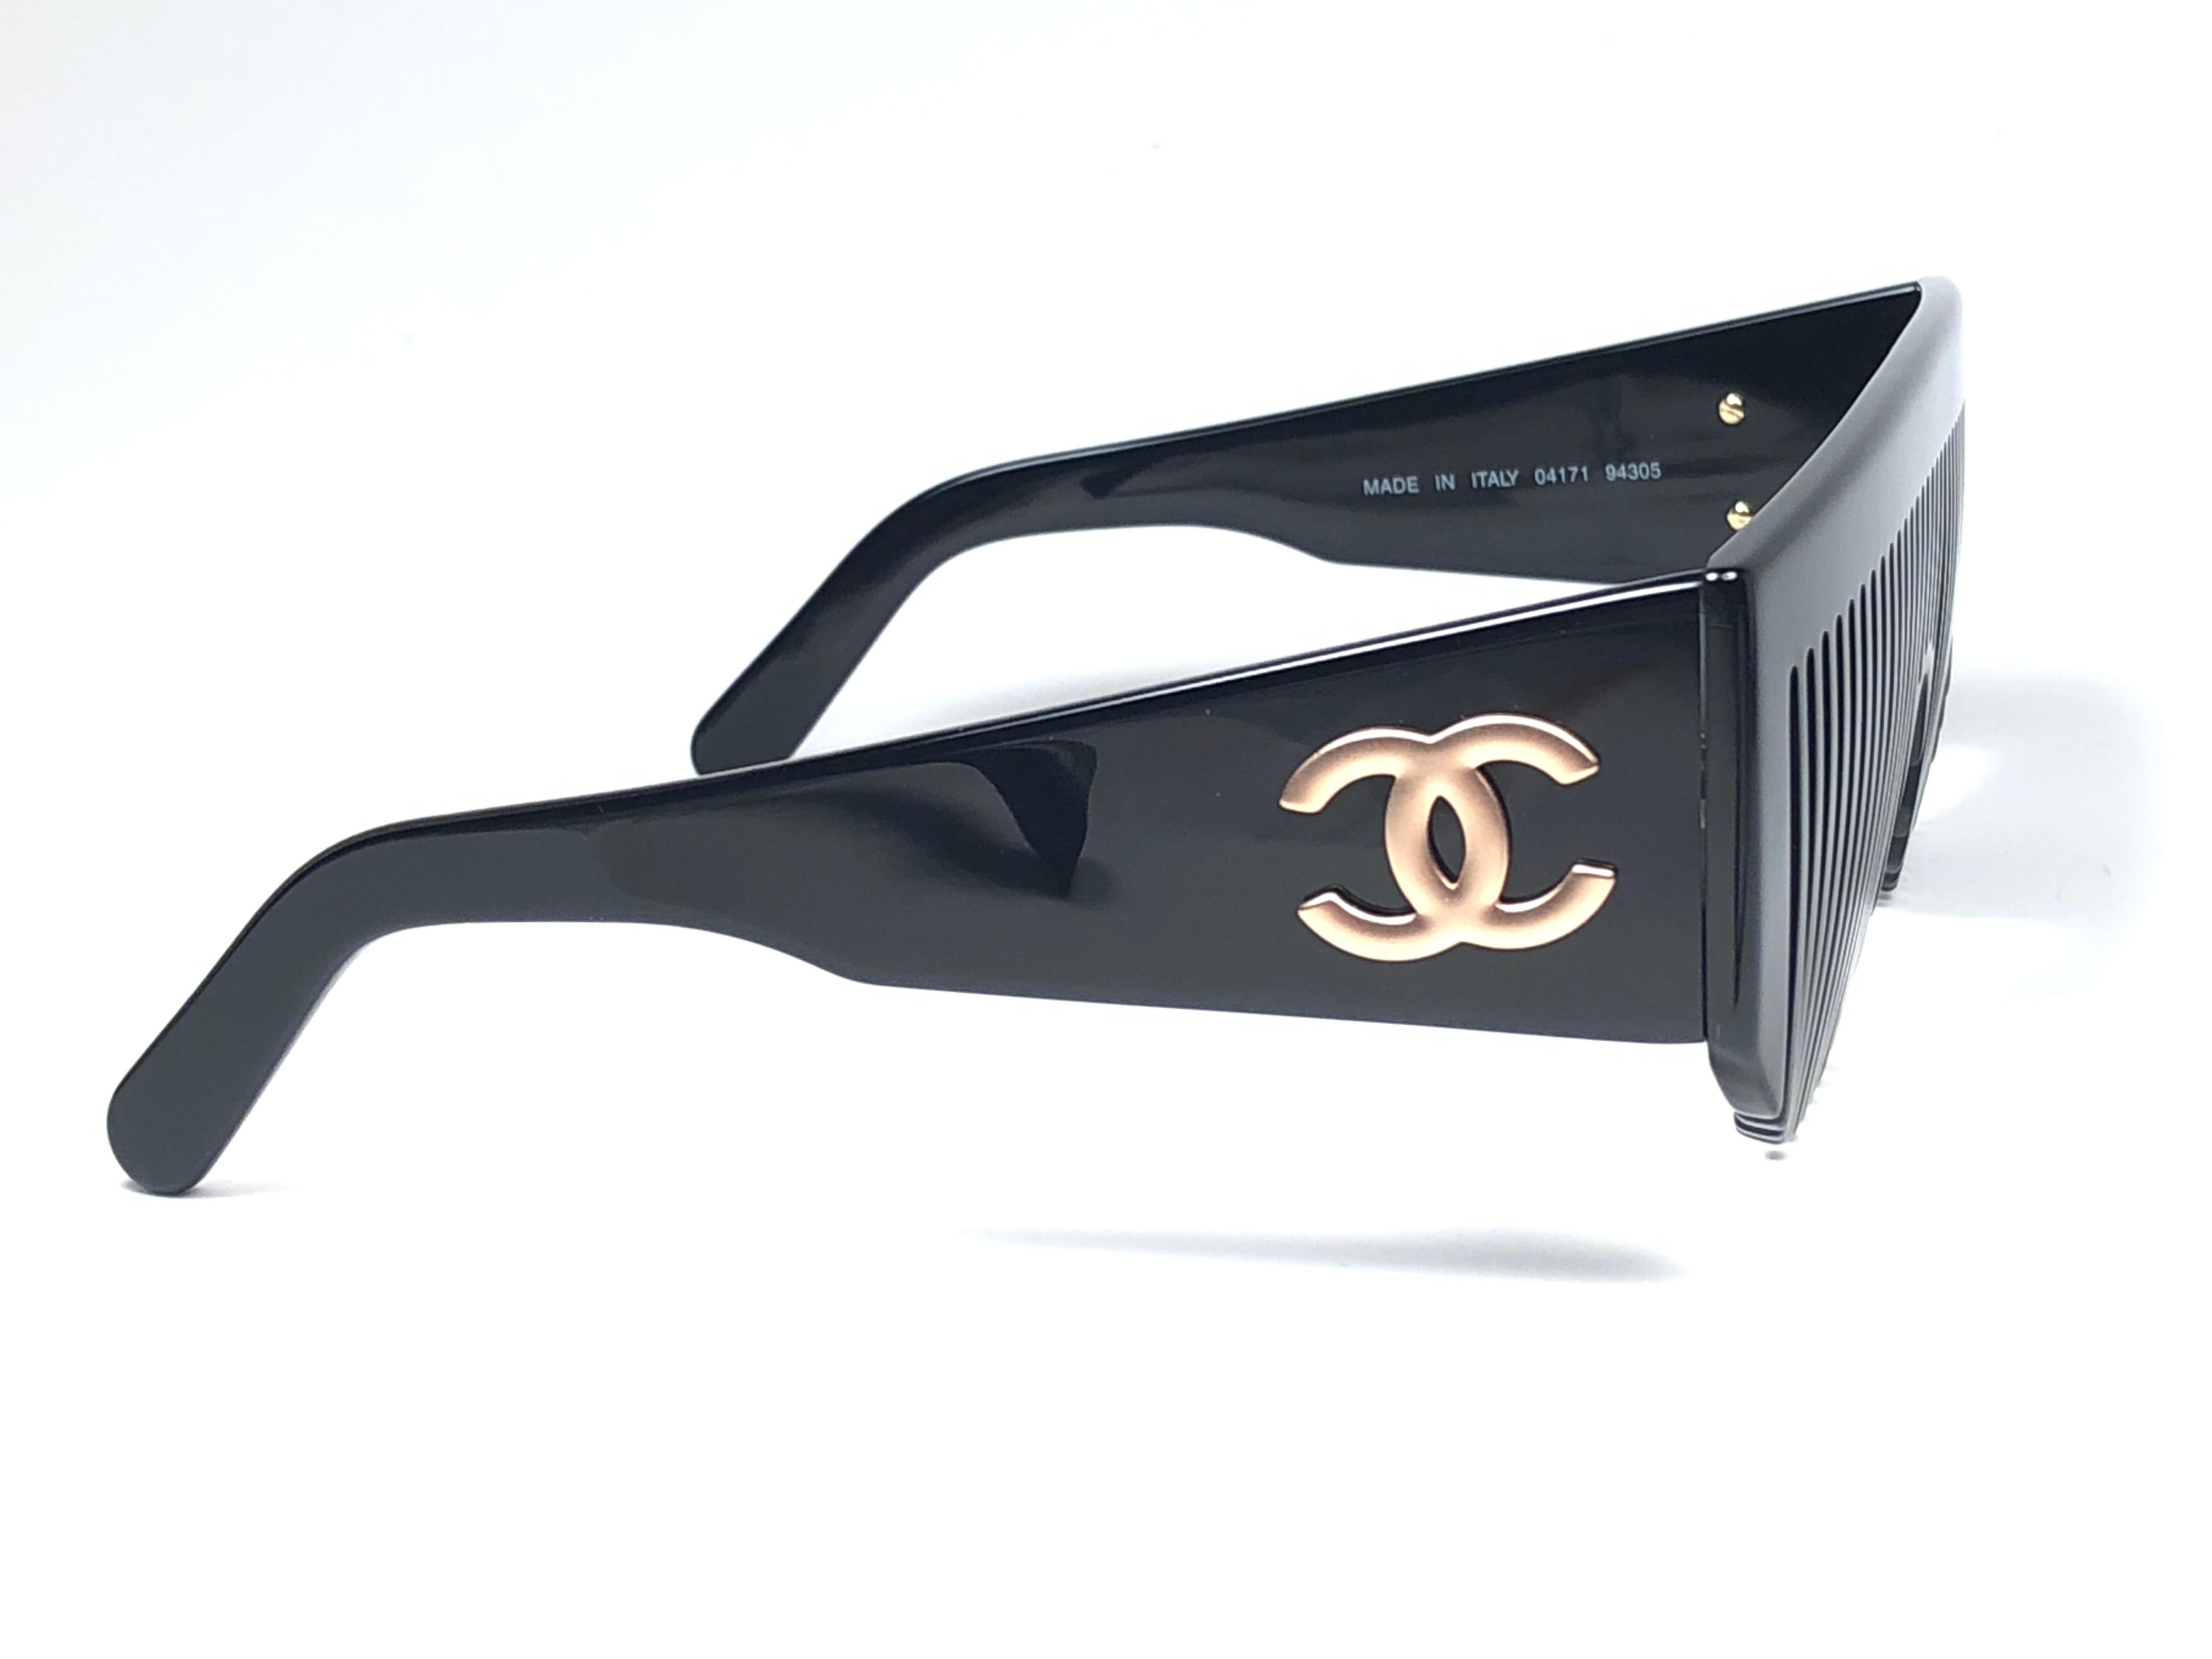 Vintage Chanel Vintage Black Comb Made In Italy Sunglasses 1993 3